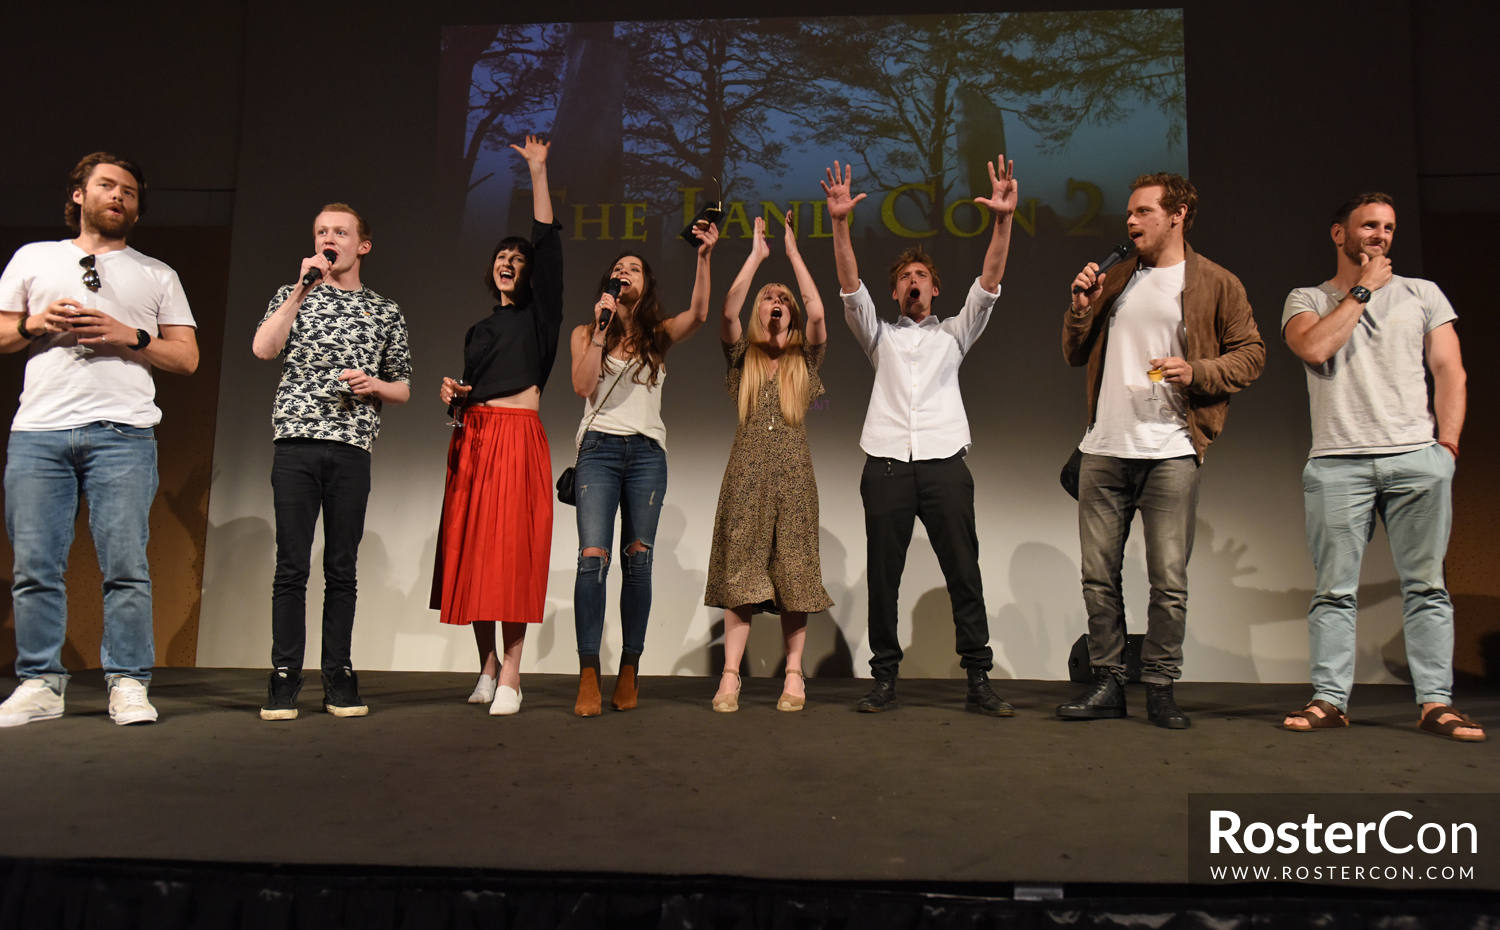 The Land Con 3 : The cast of Outlander will be back in Paris